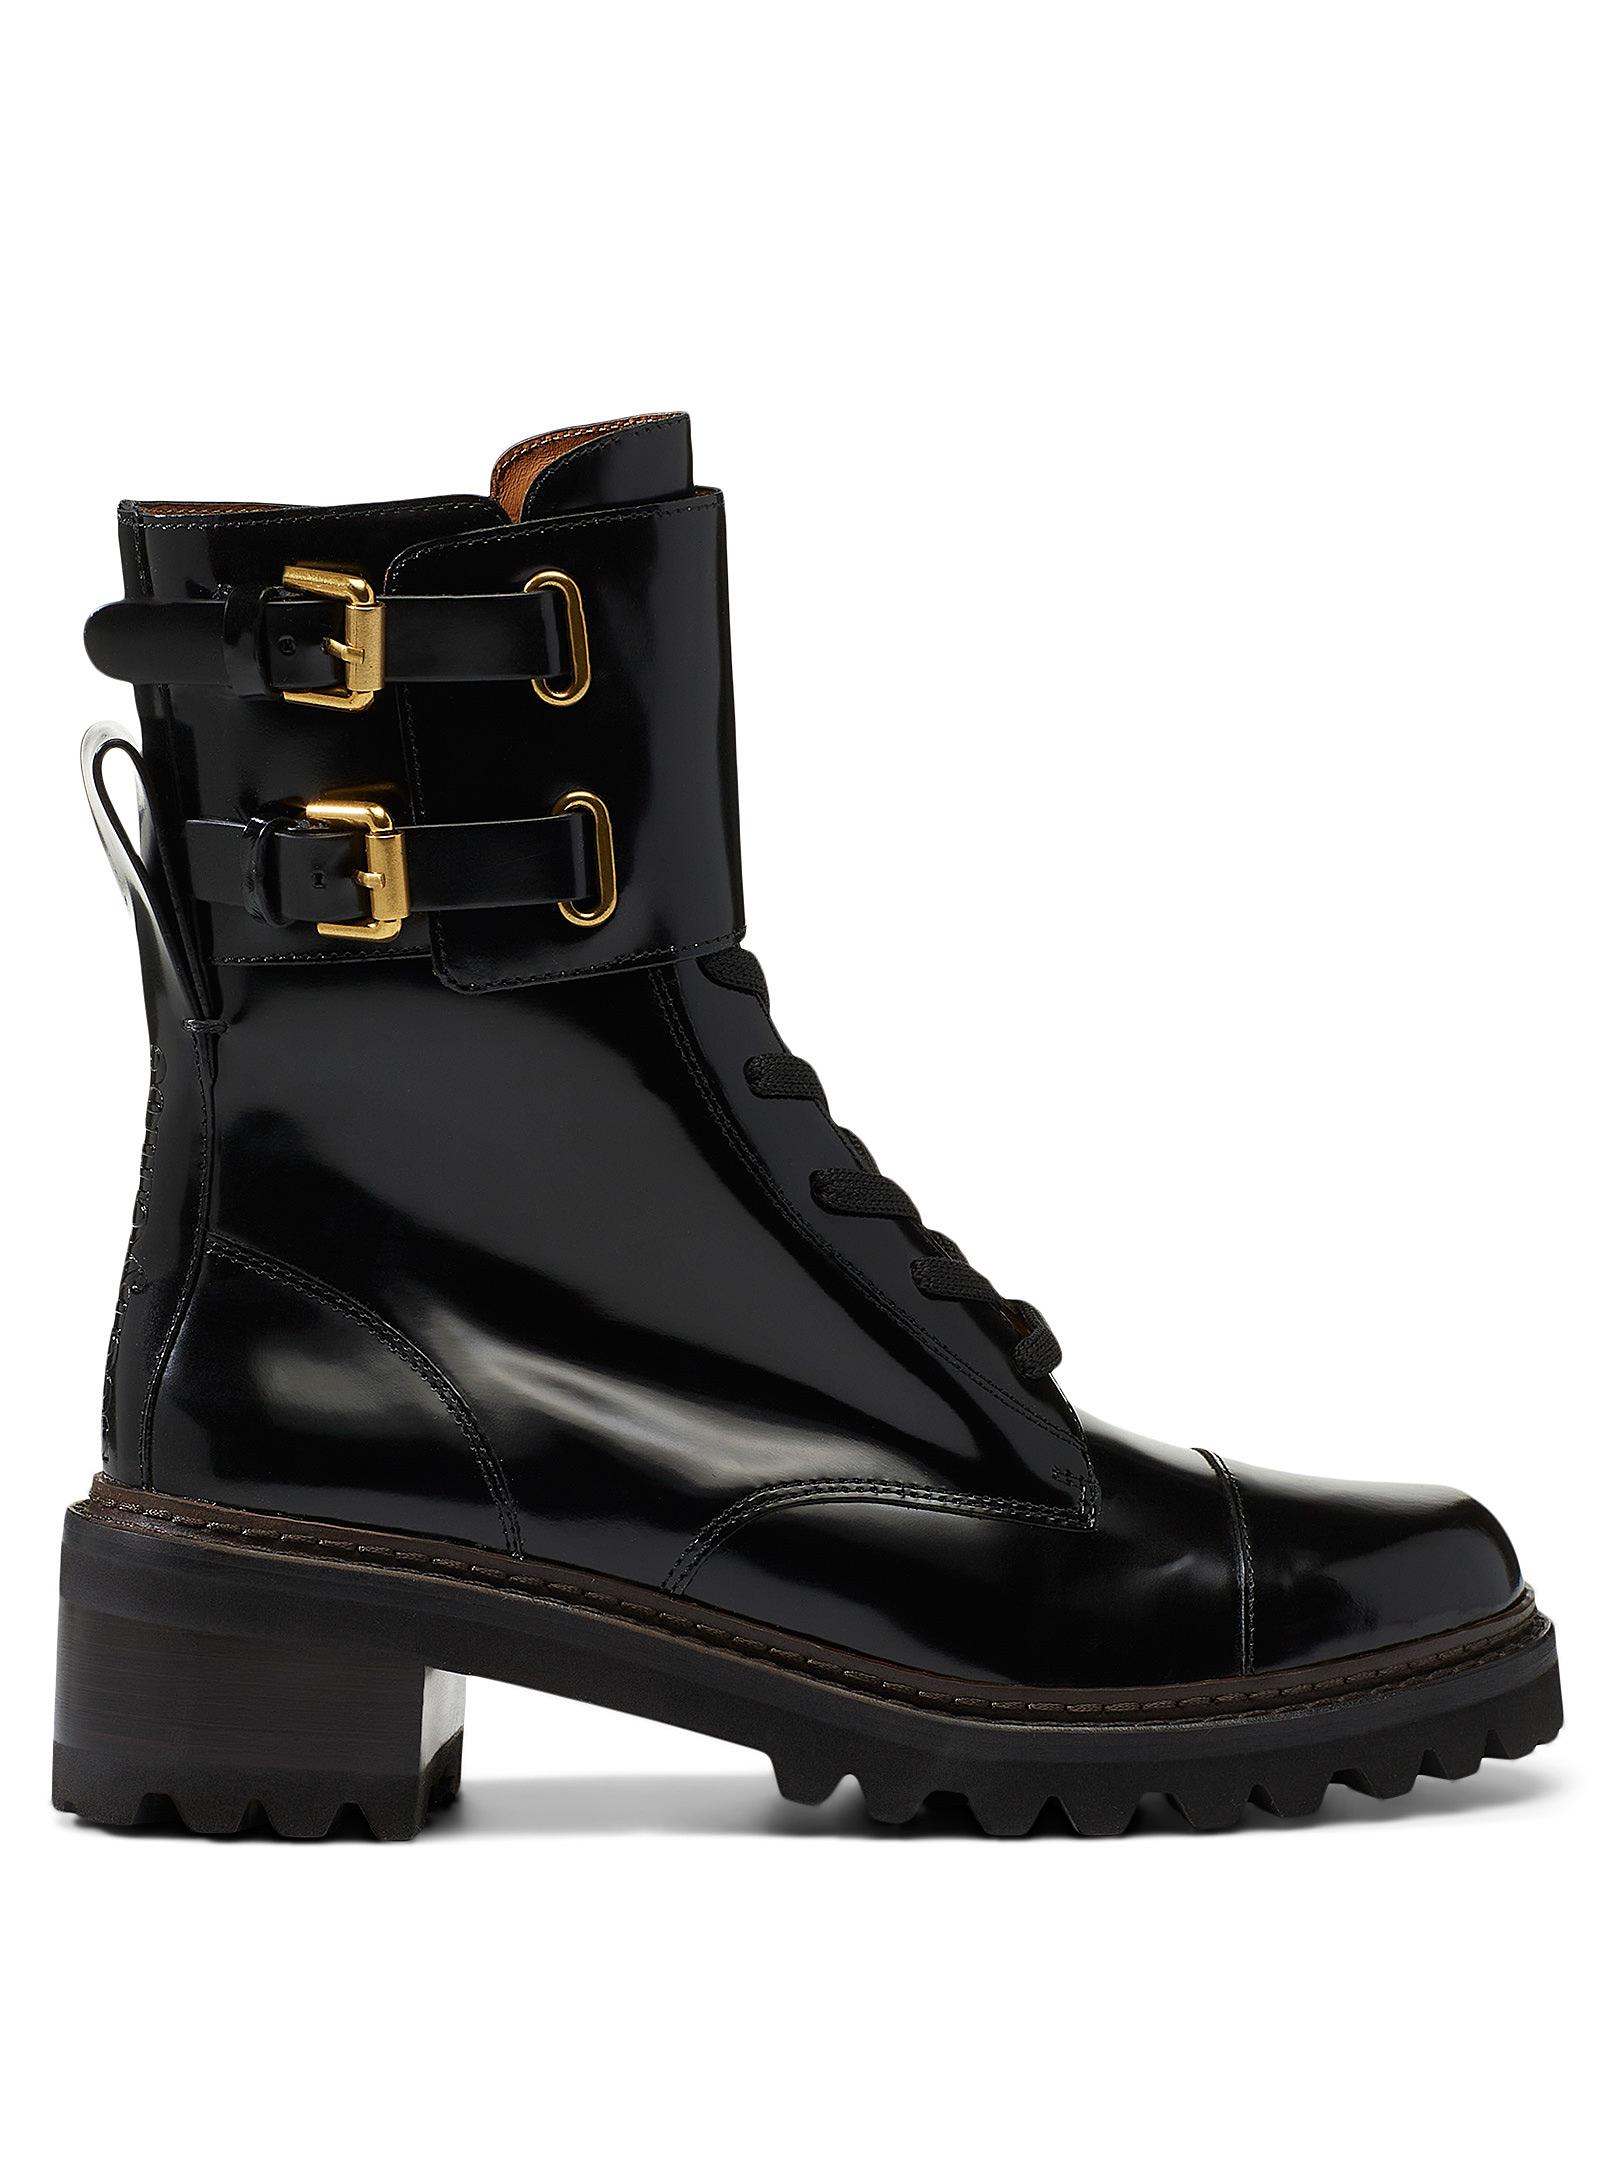 See By Chloé Leather Mallory Combat Boots in Black - Lyst